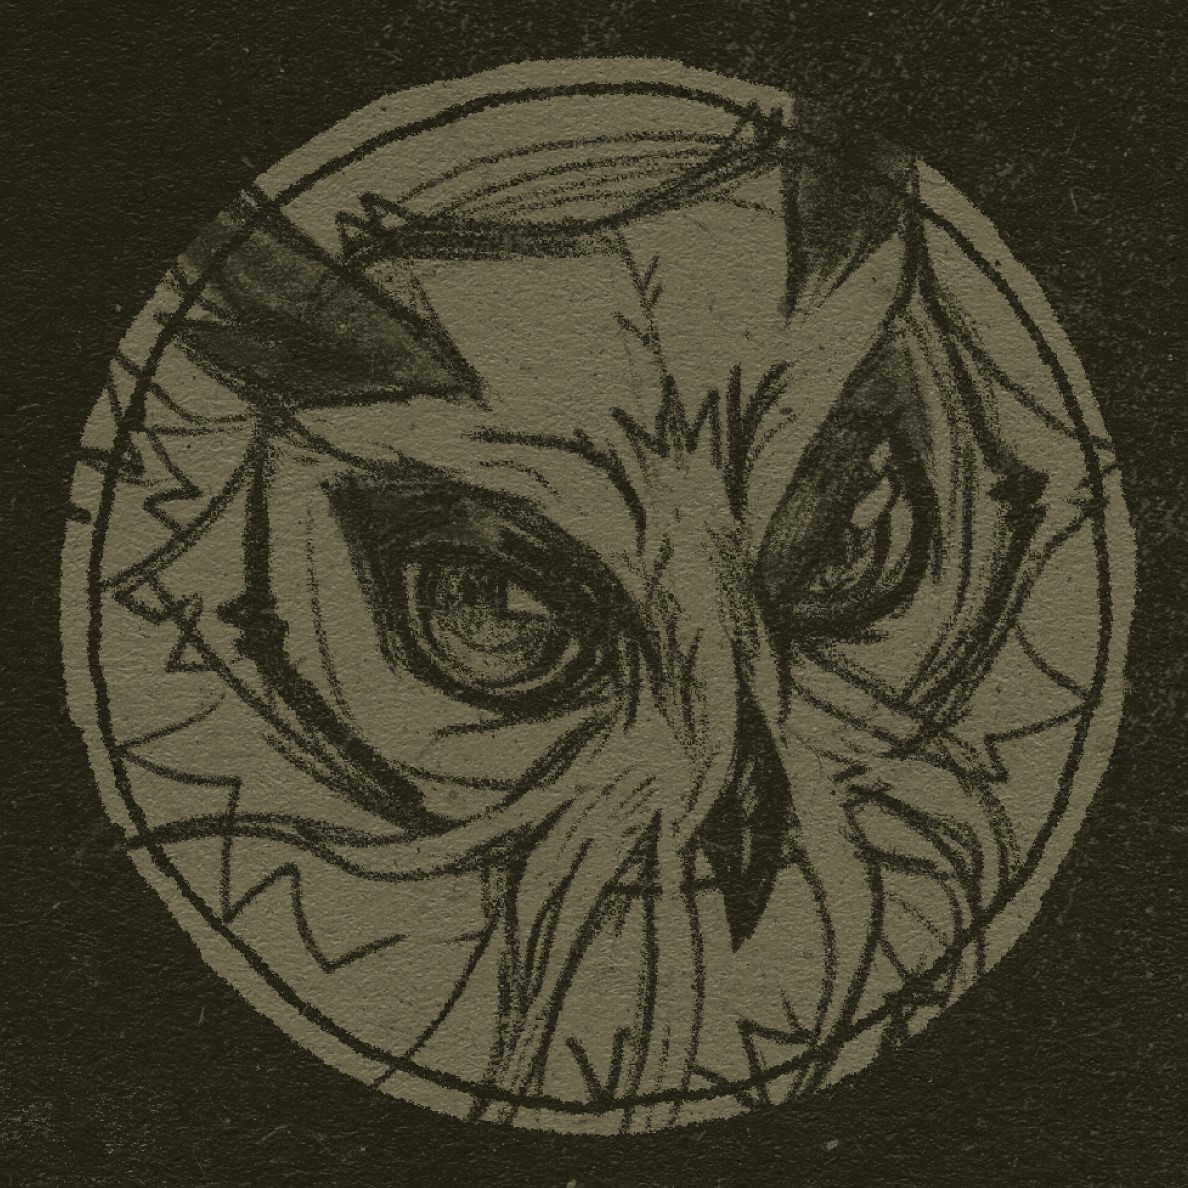 An illustration of a eldritch owl, whose beak feathers form tentical-like tendrils. Their expression is dark and mysterious. 